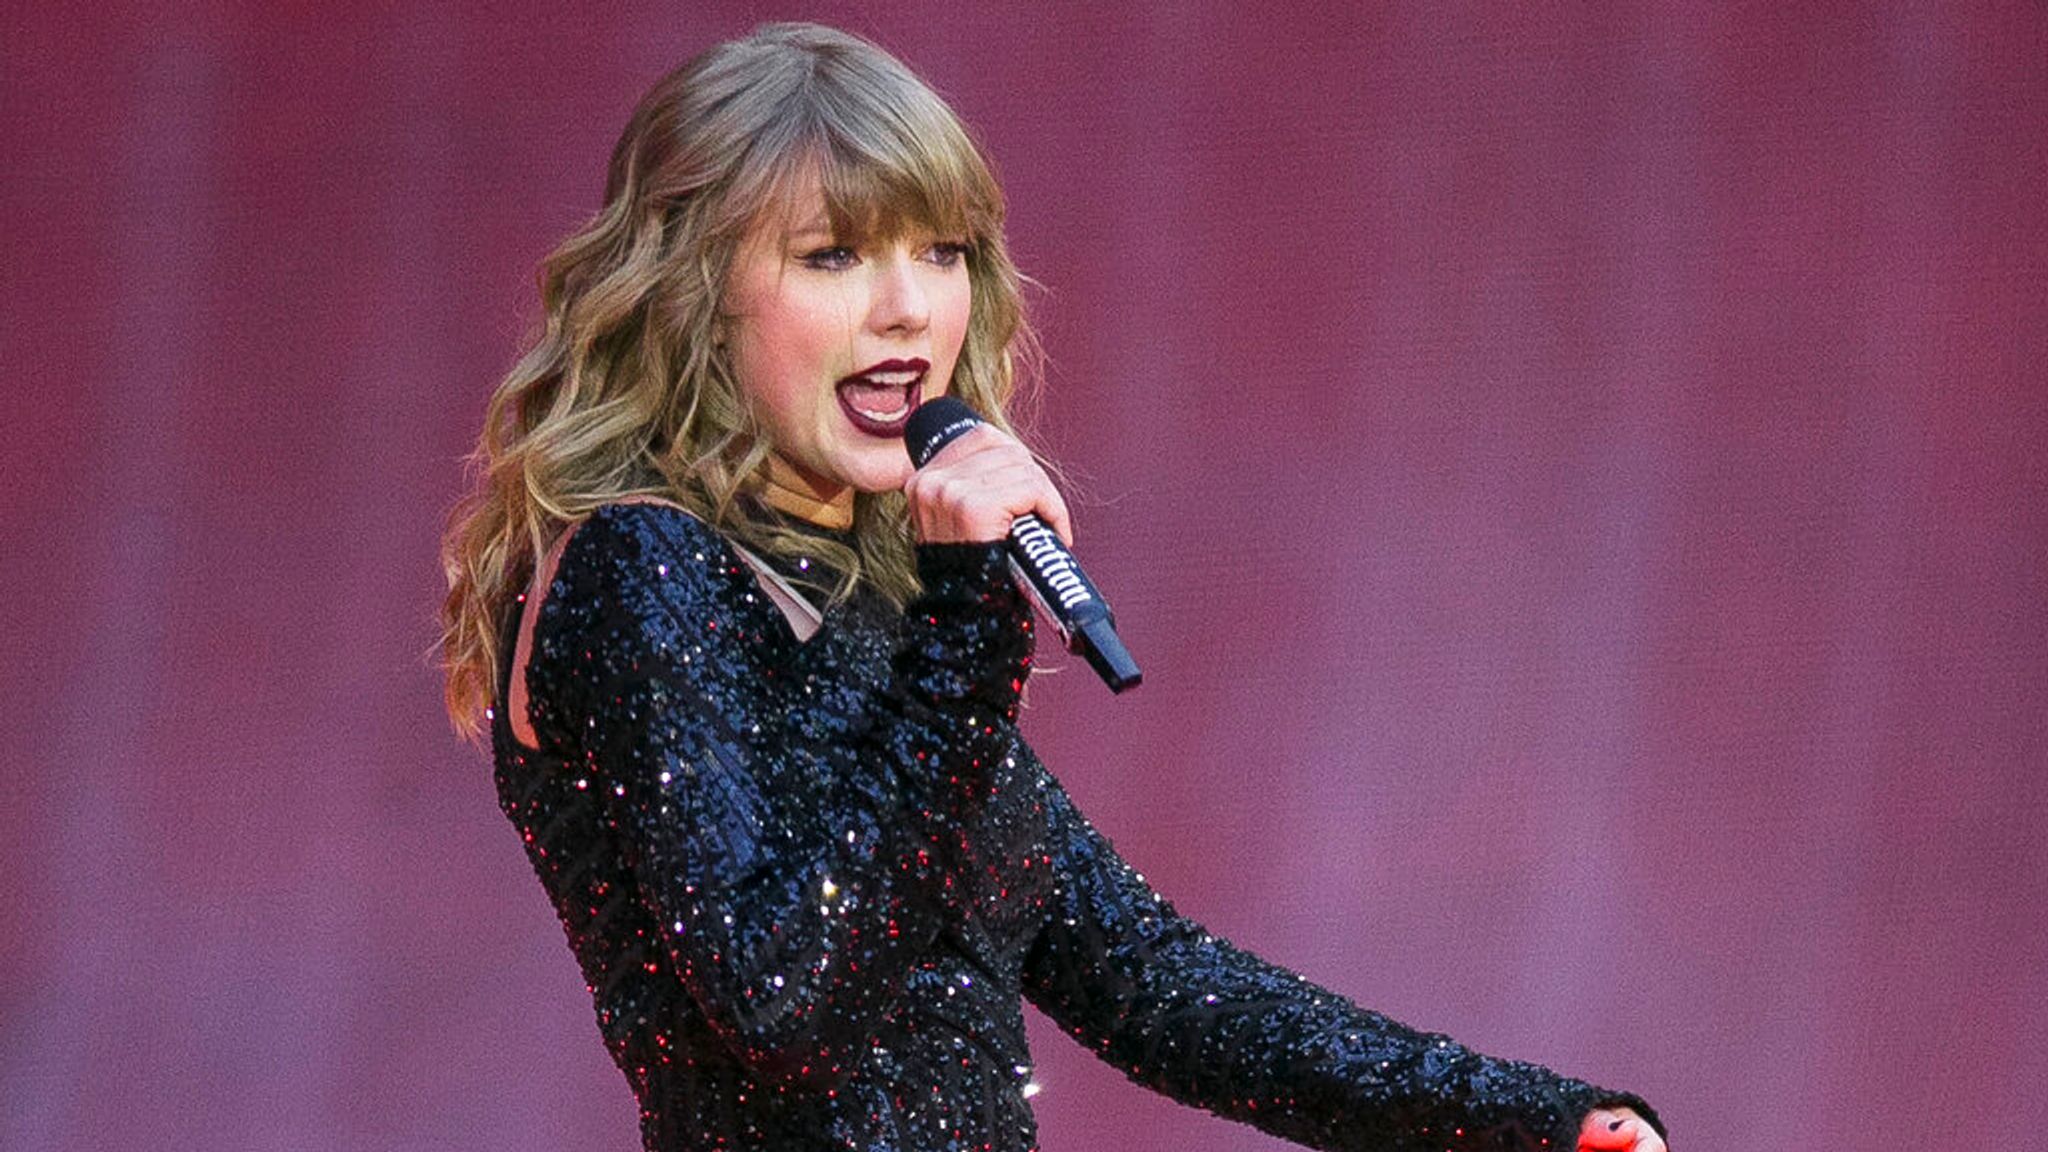 Taylor Swift's Ticketmaster Tour Chaos Explained: What Happened And Why Is The US Senate Involved?